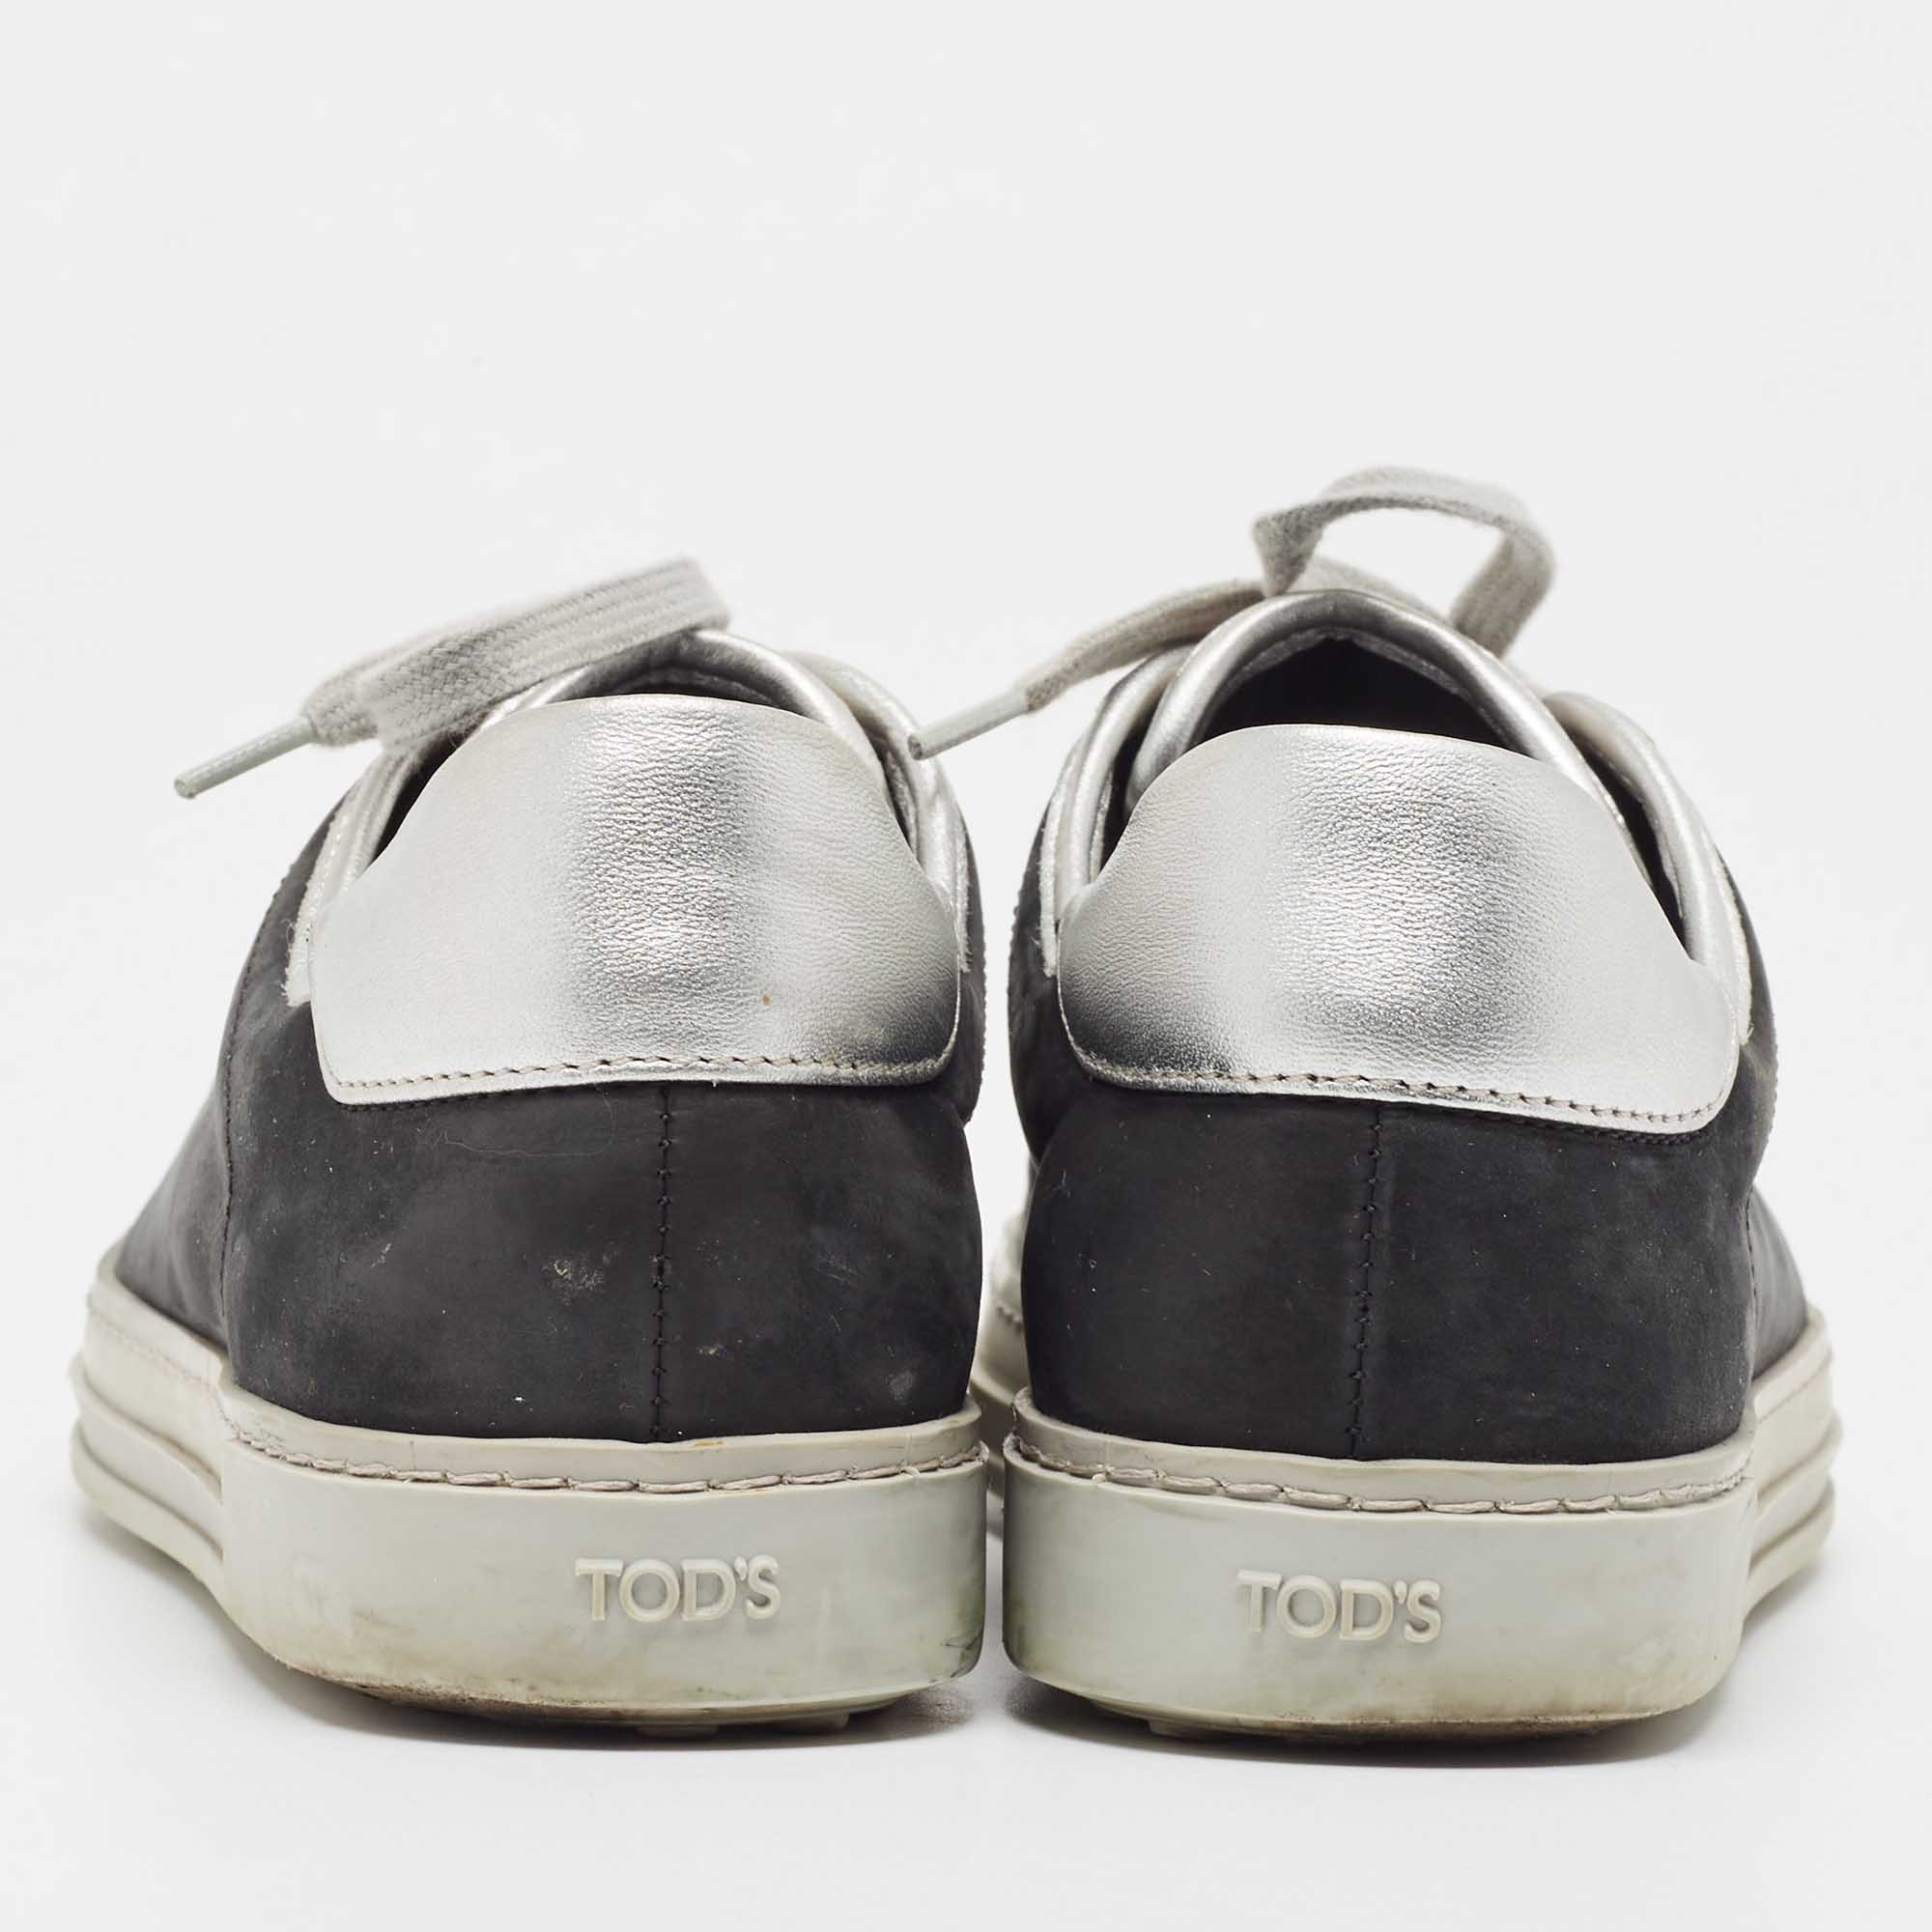 Tod's Black/Grey Nubuck Leather Low Top Sneakers Size 35